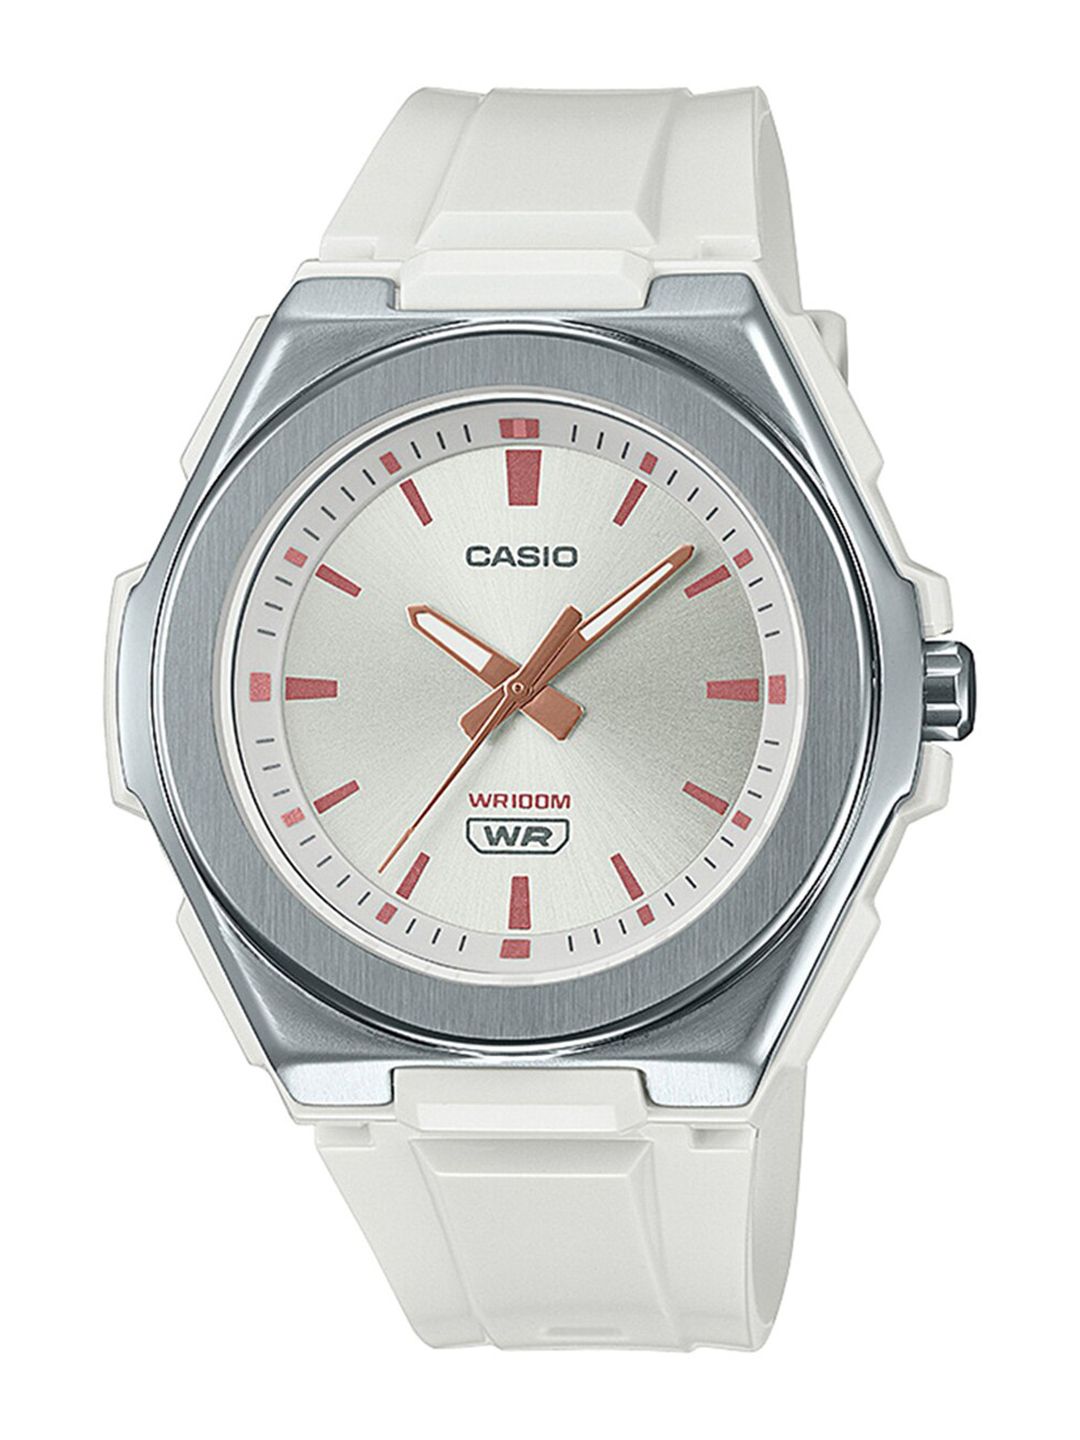 CASIO Women White Analogue Watch D221 Price in India